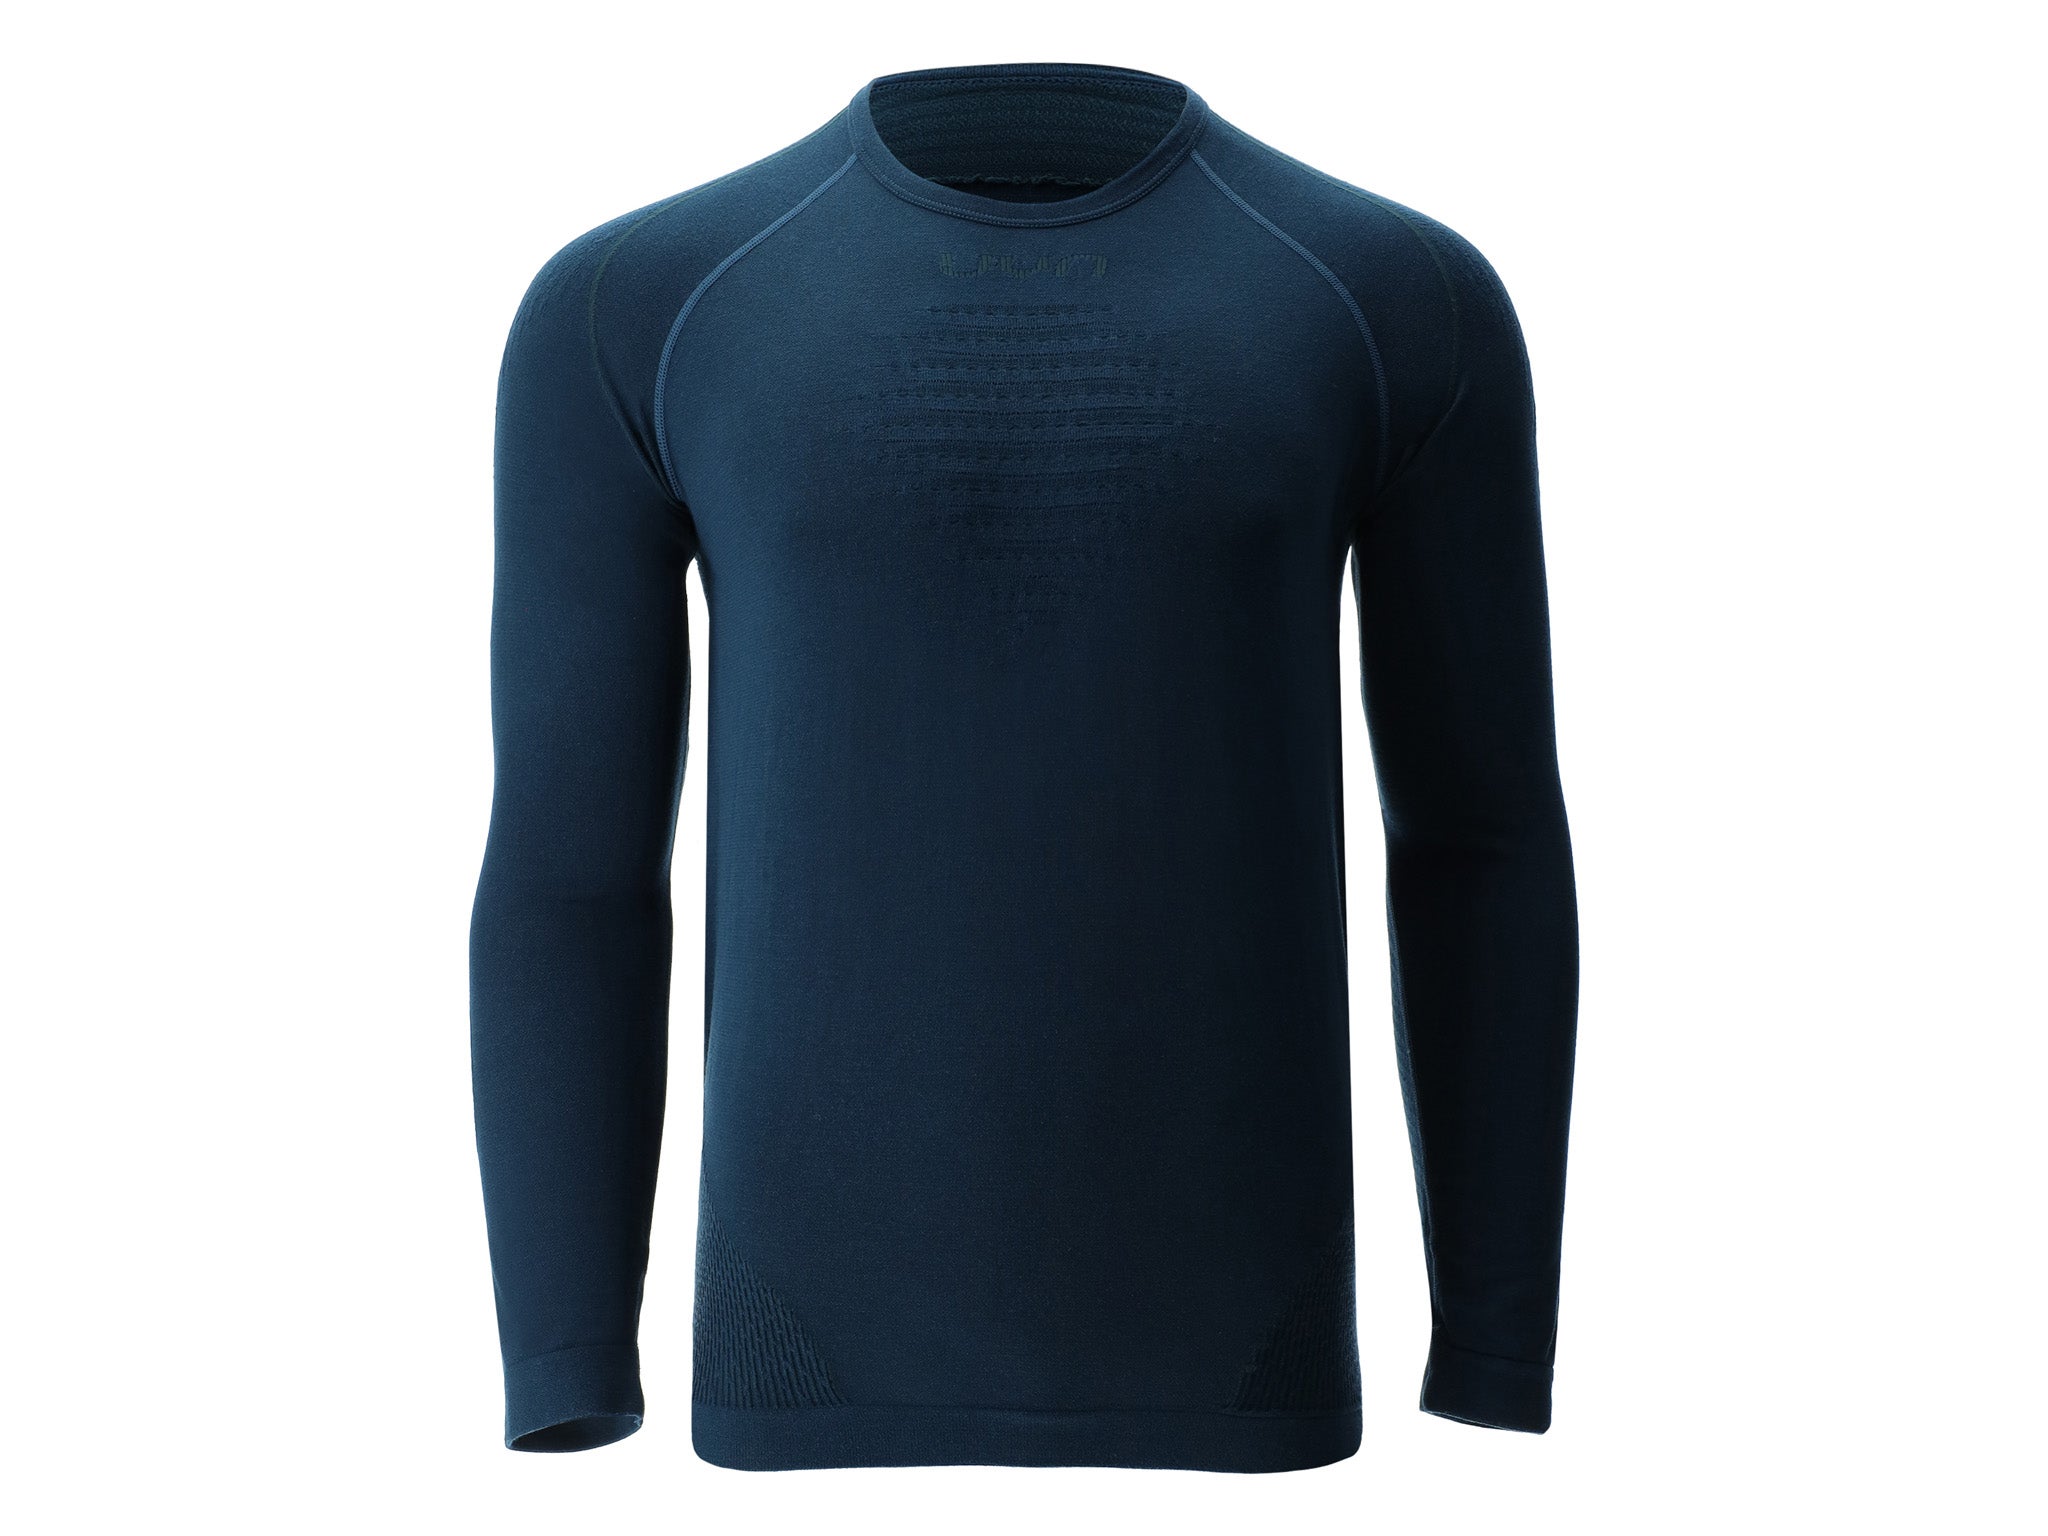 Uynman-Indybest-baselayer-review